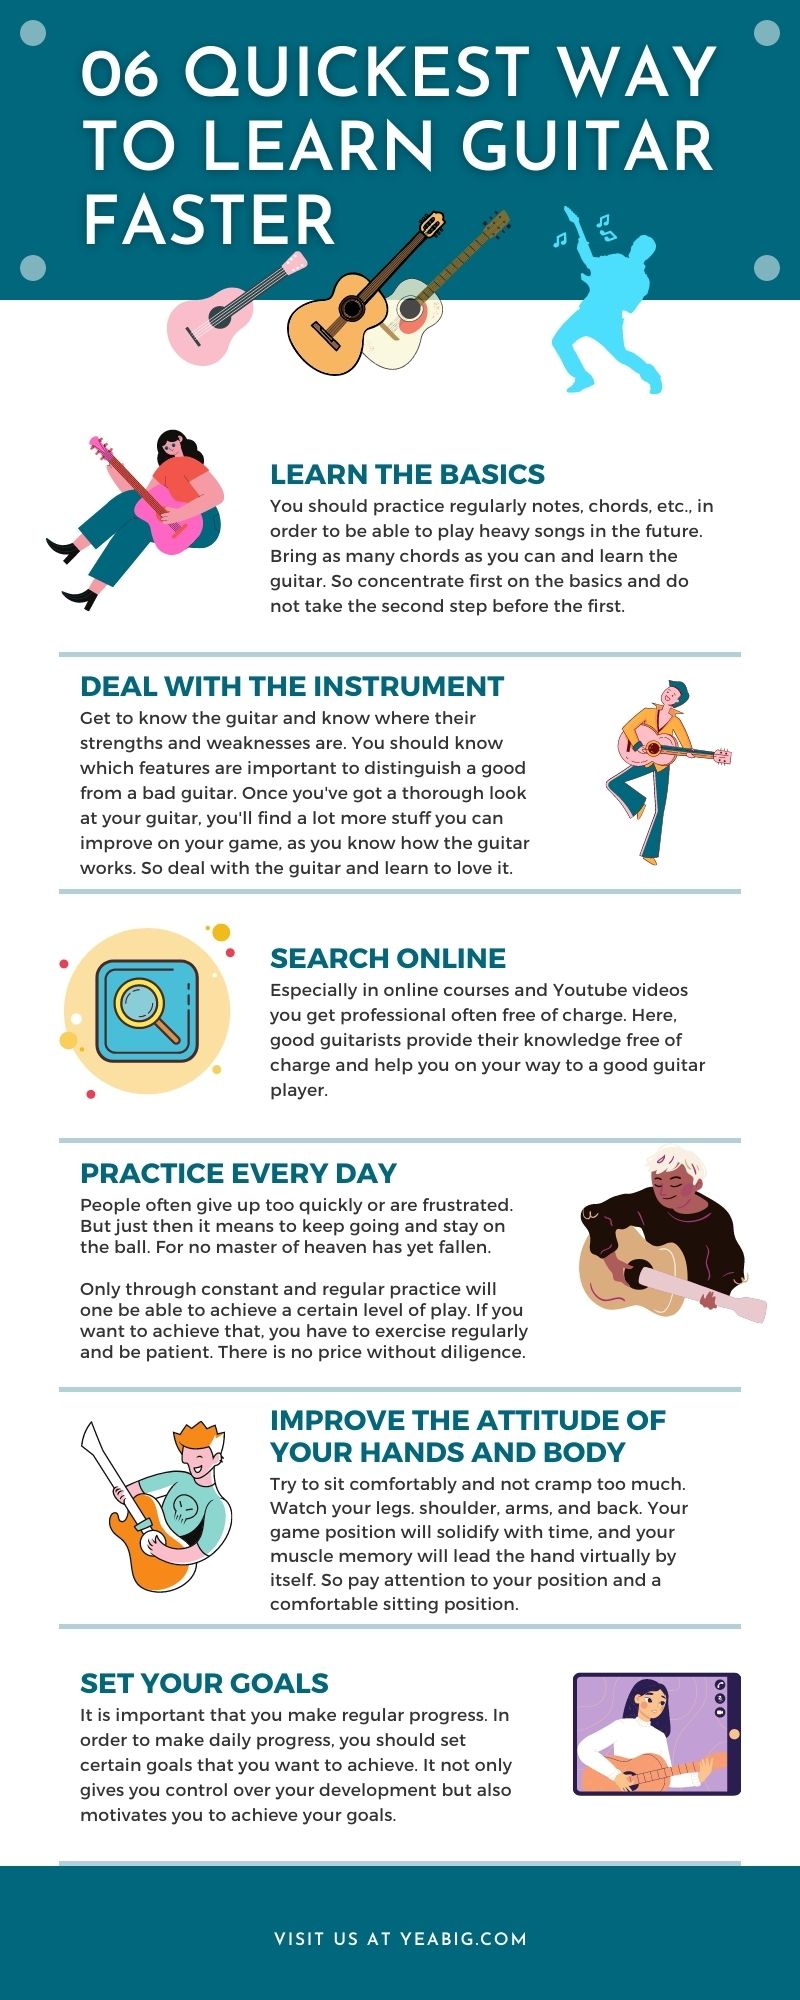 Top 06 Quickest Way to Learn to Play Guitar Faster (Infographic)